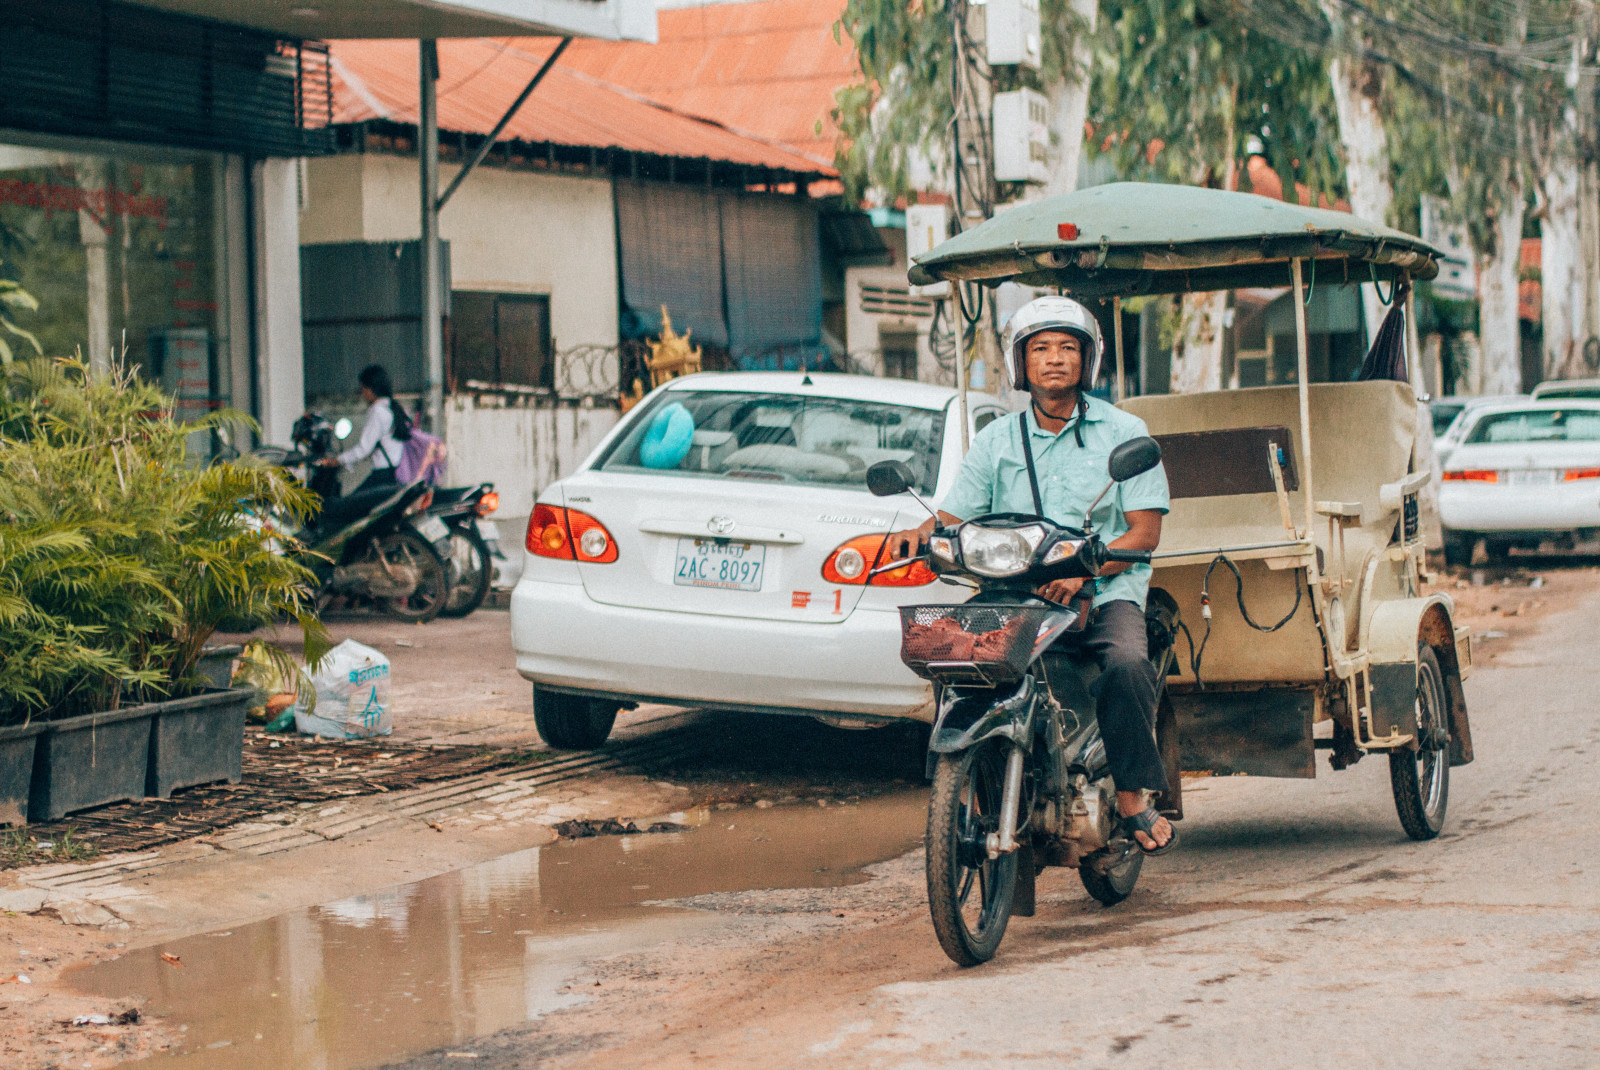 A 3-Day Itinerary of Siem Reap - Day 1: Arrive